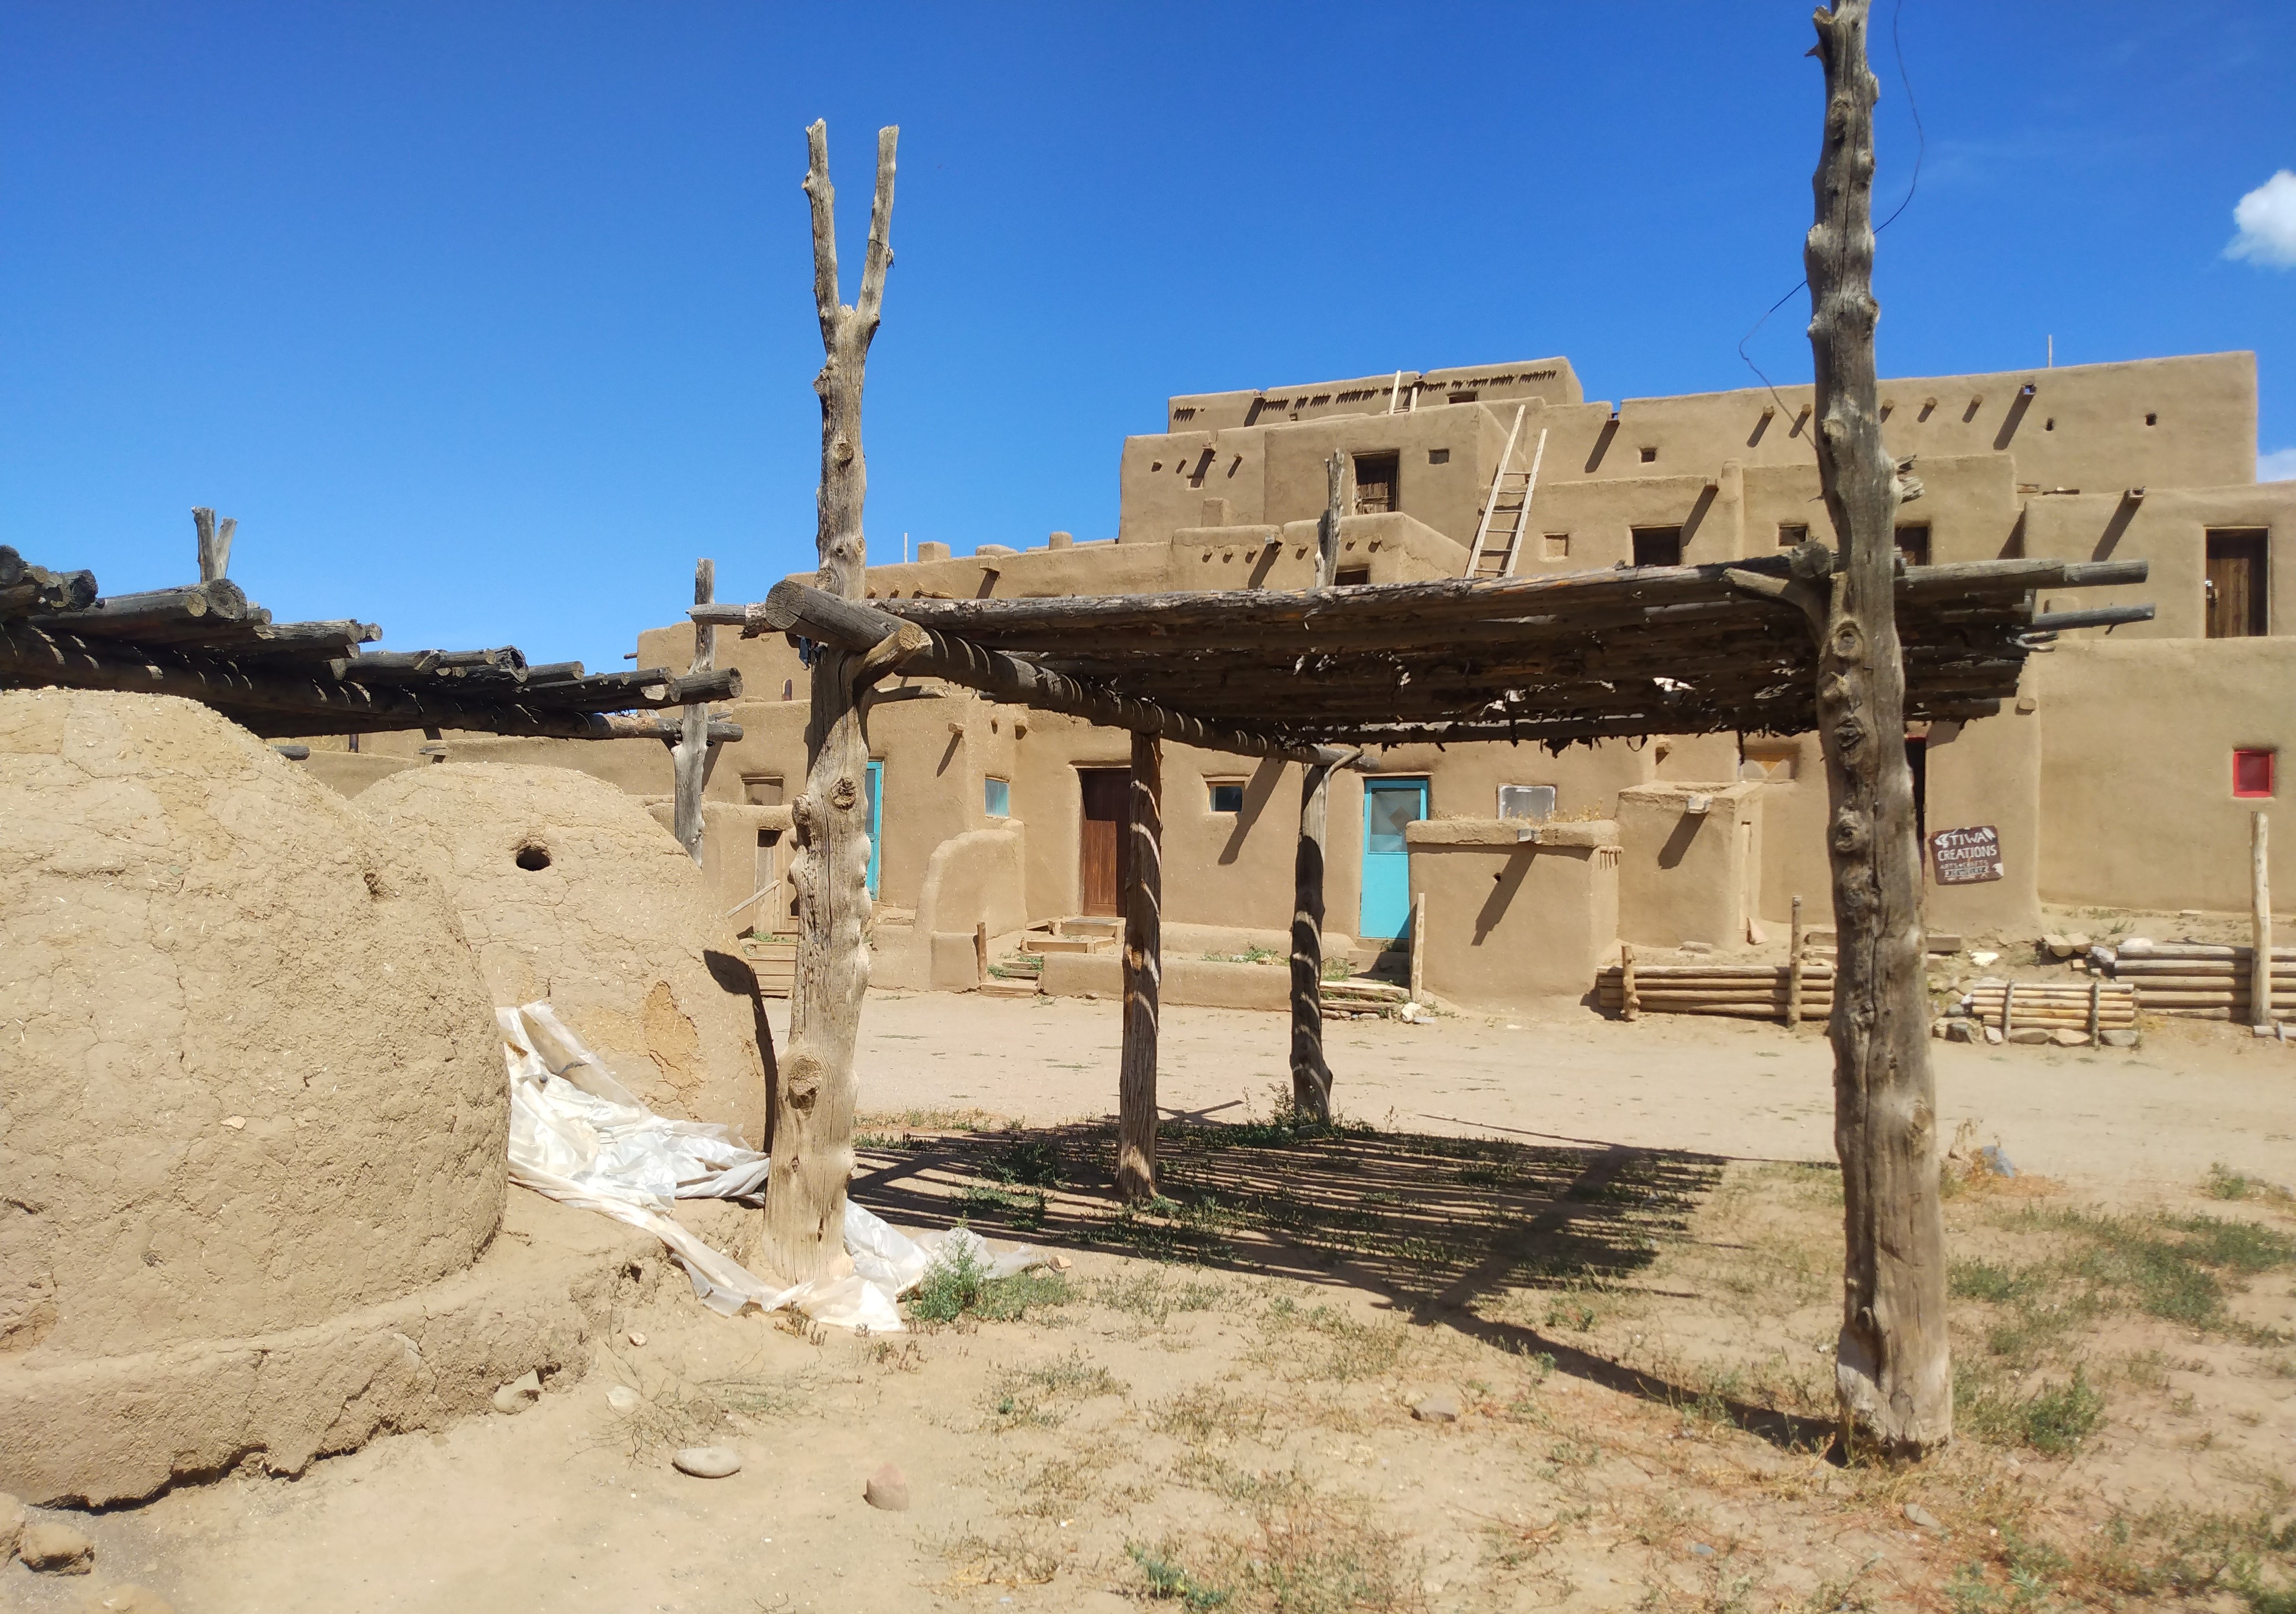 Traditional adobe buildings at the Taos Pueblo in New Mexico under a clear blue sky. The ancient pueblo structures feature wooden ladders, earthen walls, and are a testament to the enduring Native American architecture